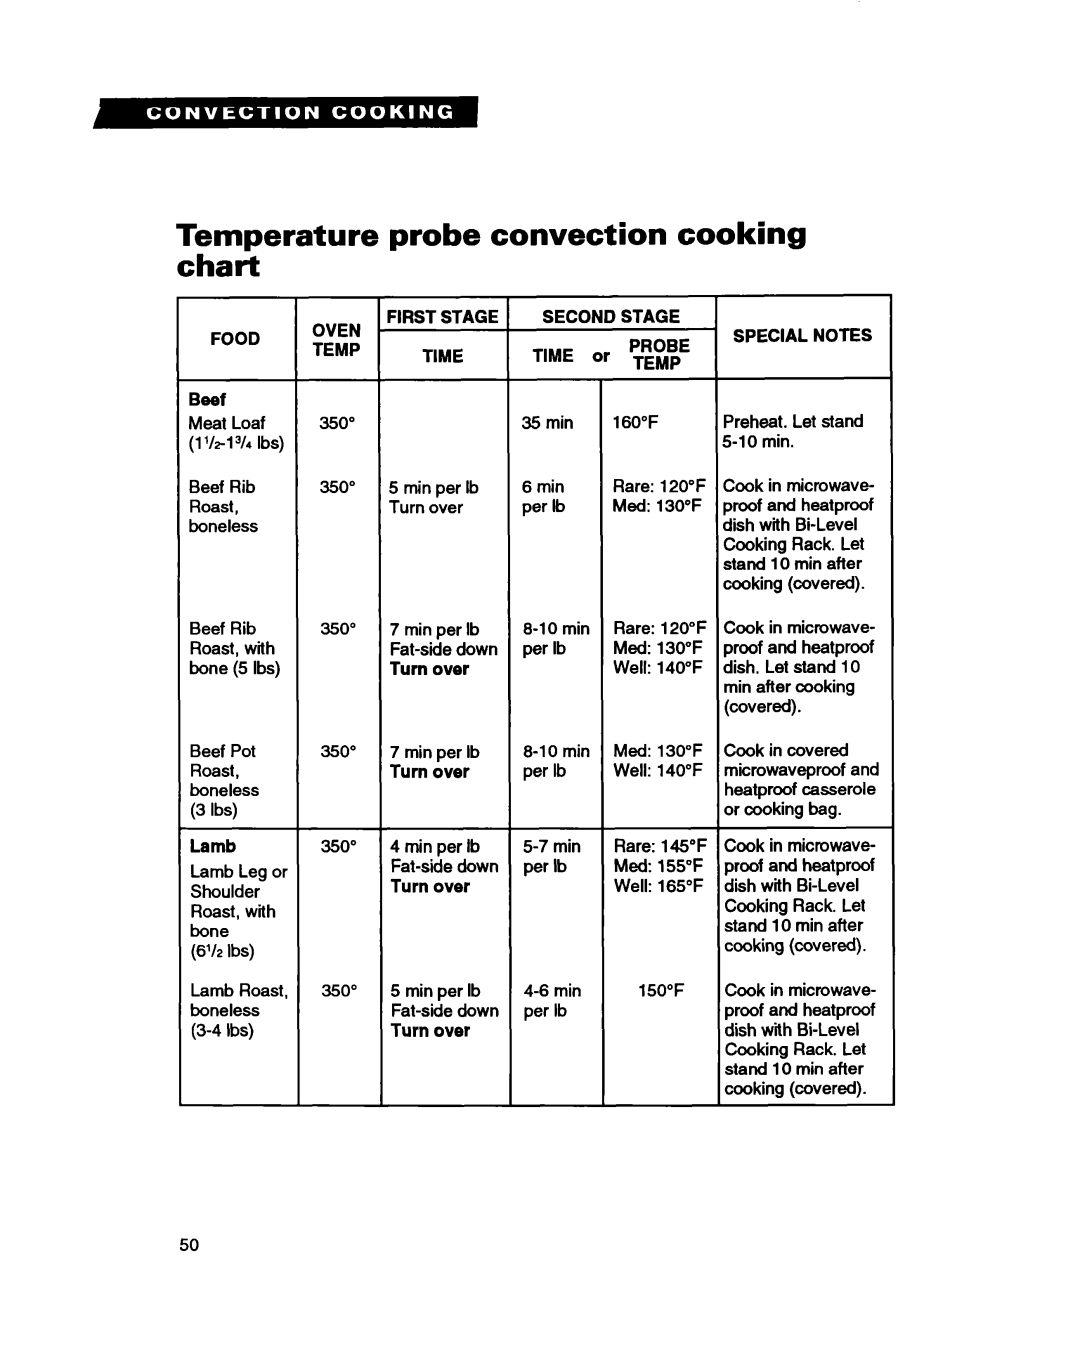 Whirlpool MC8130XA warranty probe convection cooking, Beef, Lamb 350”, Special Notes, Turn, Temperature chart, Food 